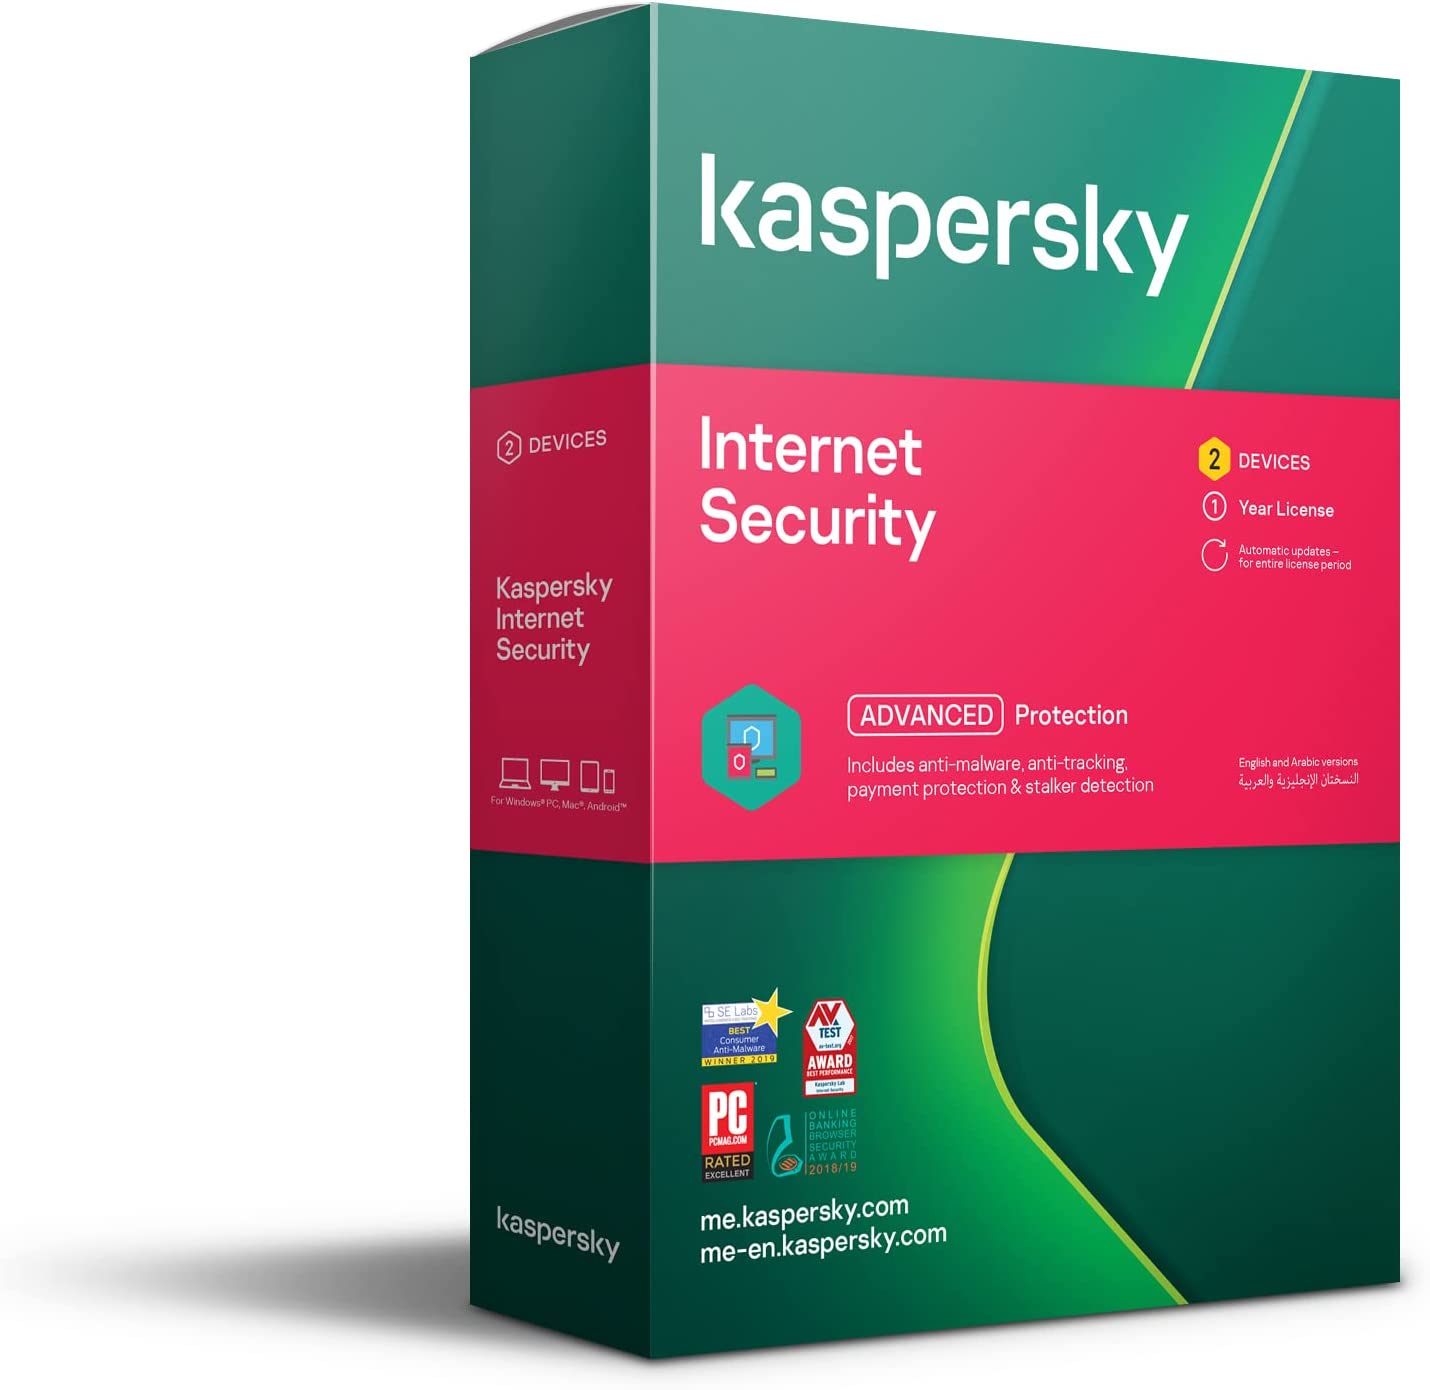 Kaspersky Internet Security, Antivirus Software Licence For 2 Devices 365 Days